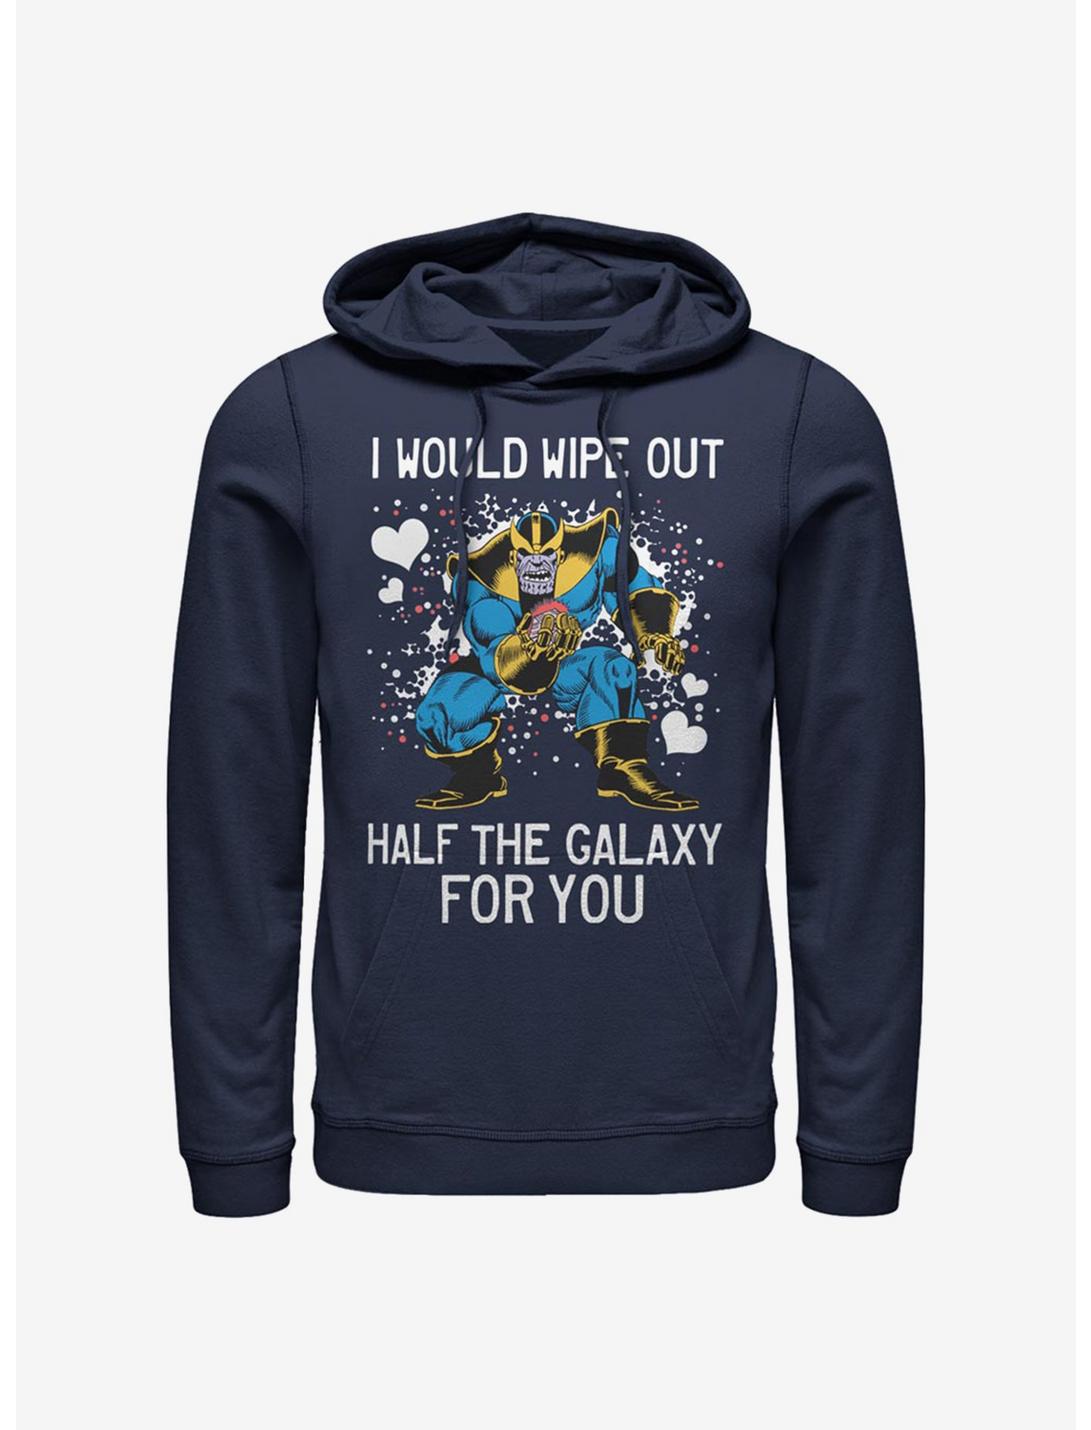 Marvel Avengers Thanos Wipe Galaxy Out Hoodie, NAVY, hi-res